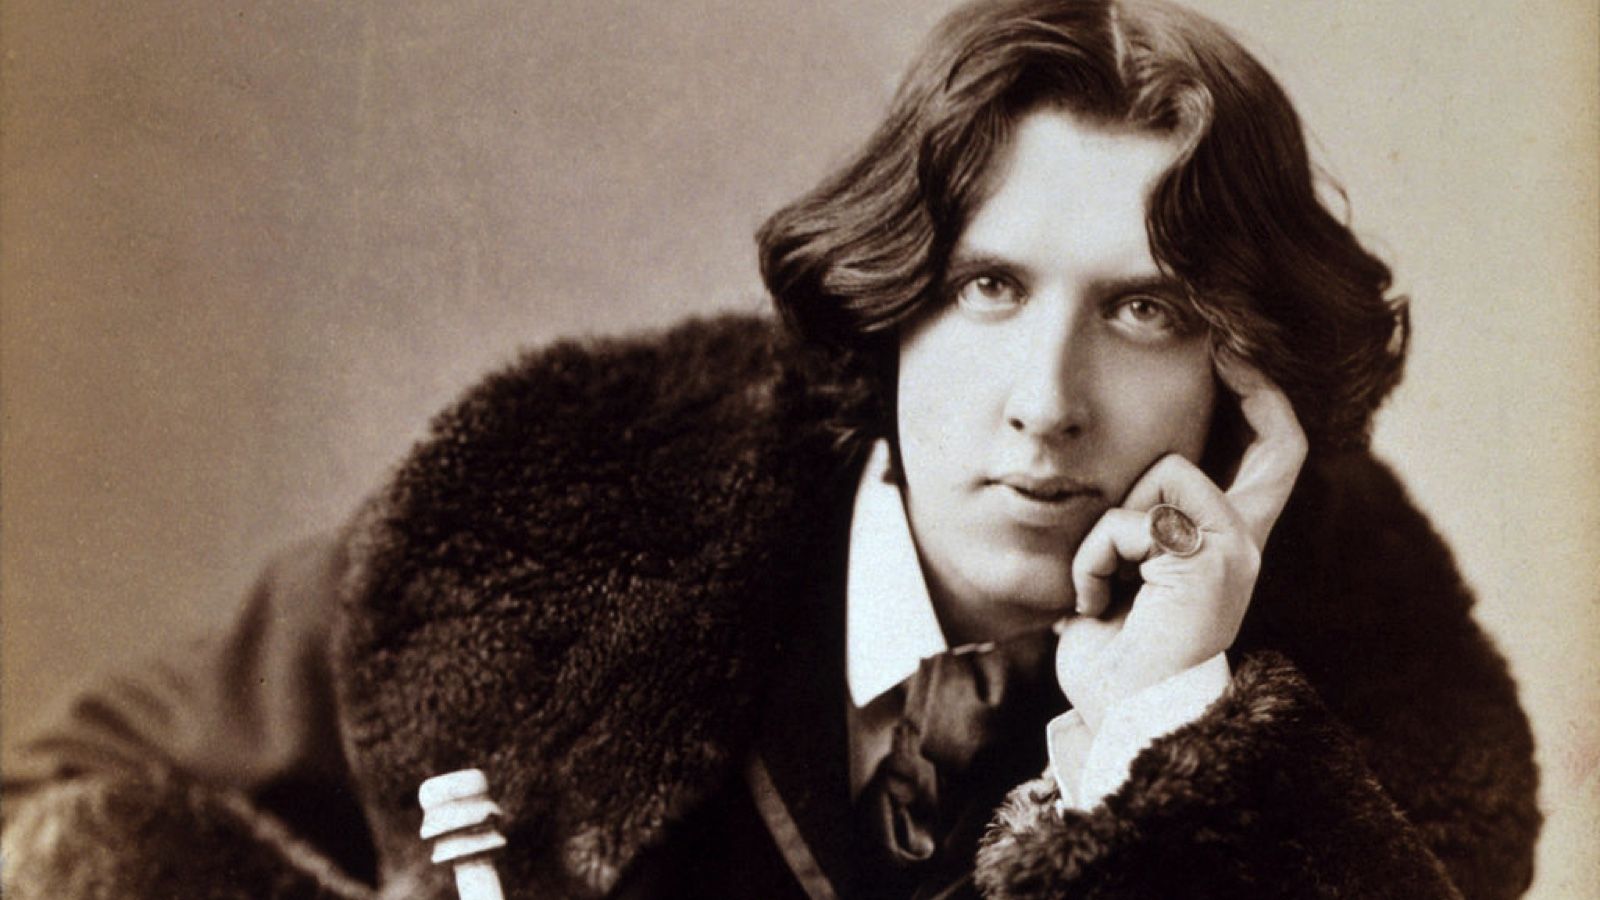 The Life and Times of Oscar Wilde